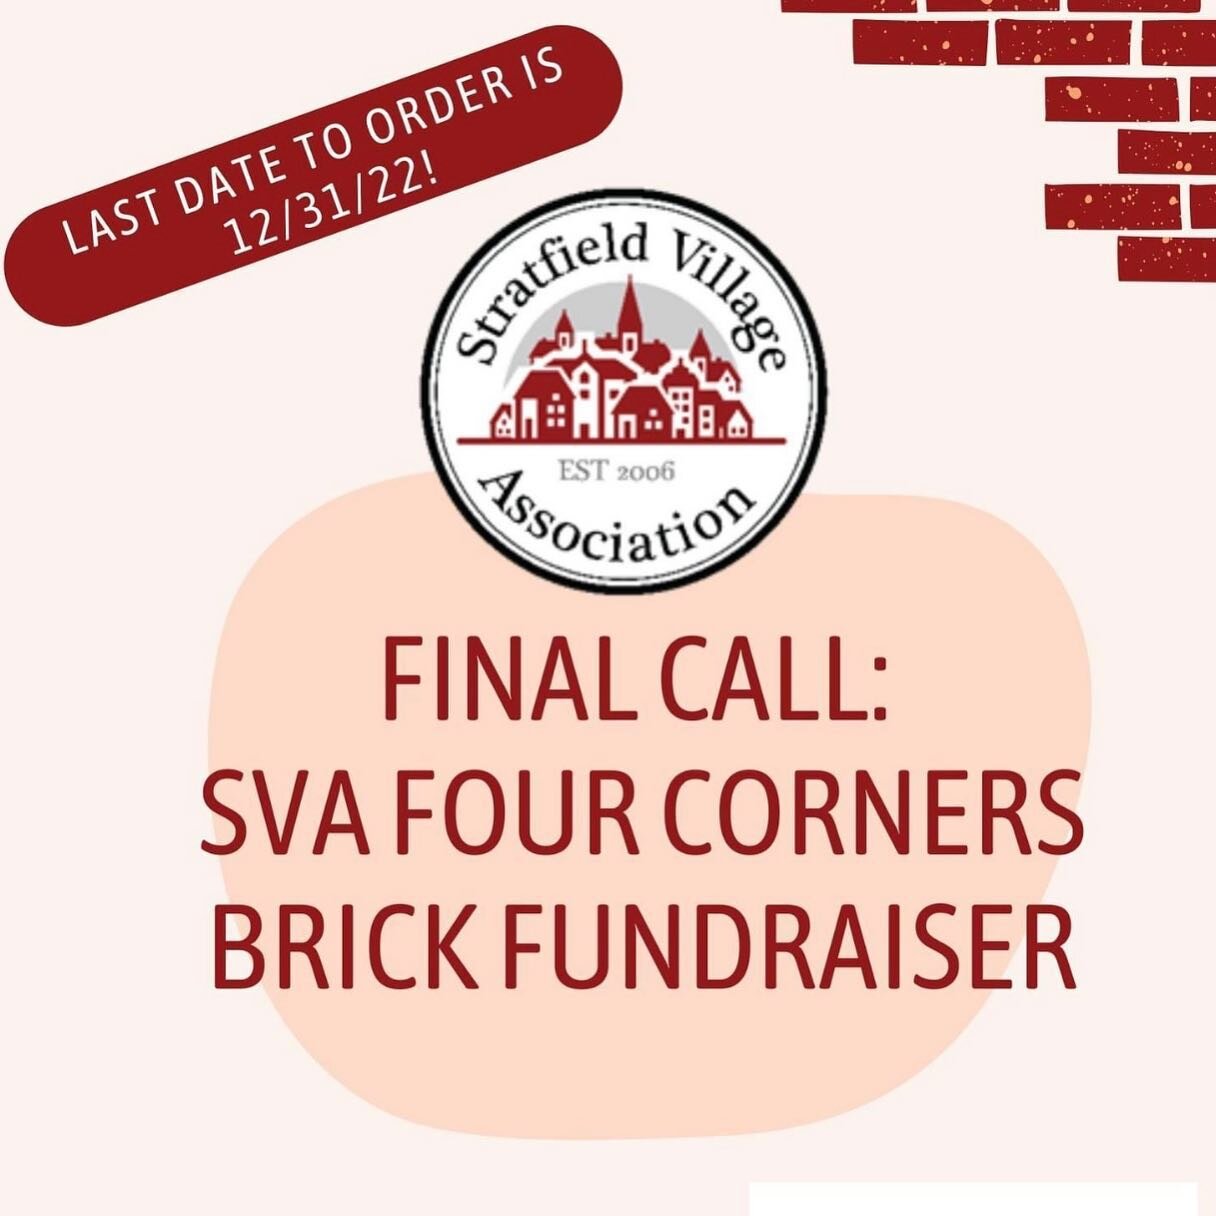 Stratfielders! This is our FINAL CALL to order your bricks for the Four Corners project! 

Do you keep meaning to get one and put it off or forget? You've got until Dec. 31 to put in your order! 

Get your personalized 4&rdquo;x 8&rdquo; or 8&rdquo;x